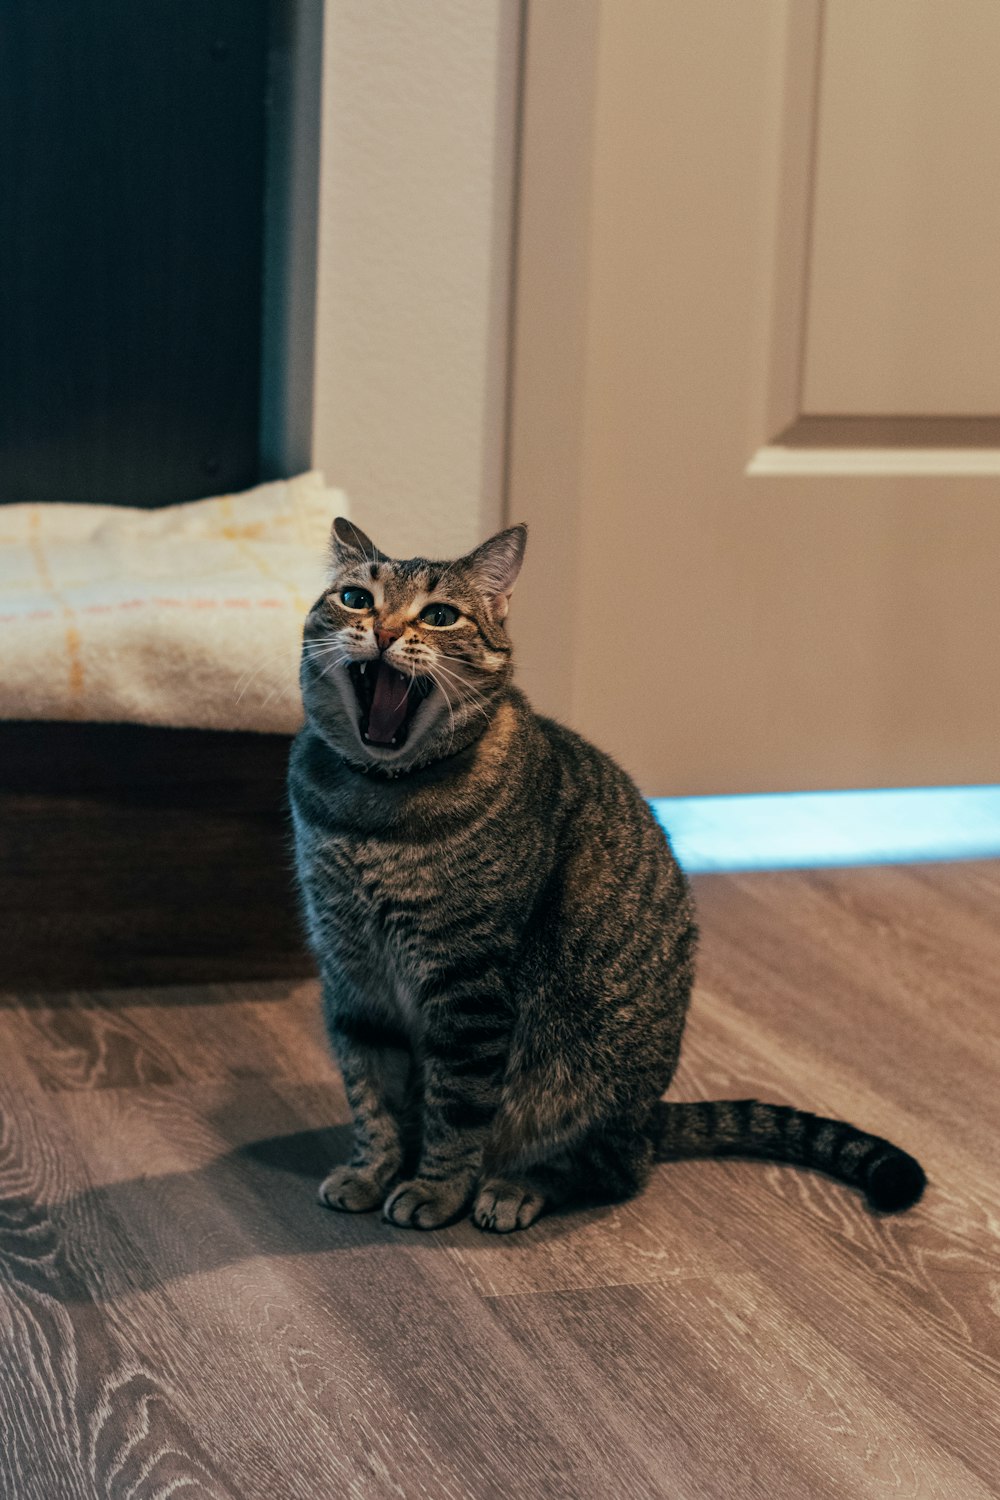 a cat yawns while sitting on the floor